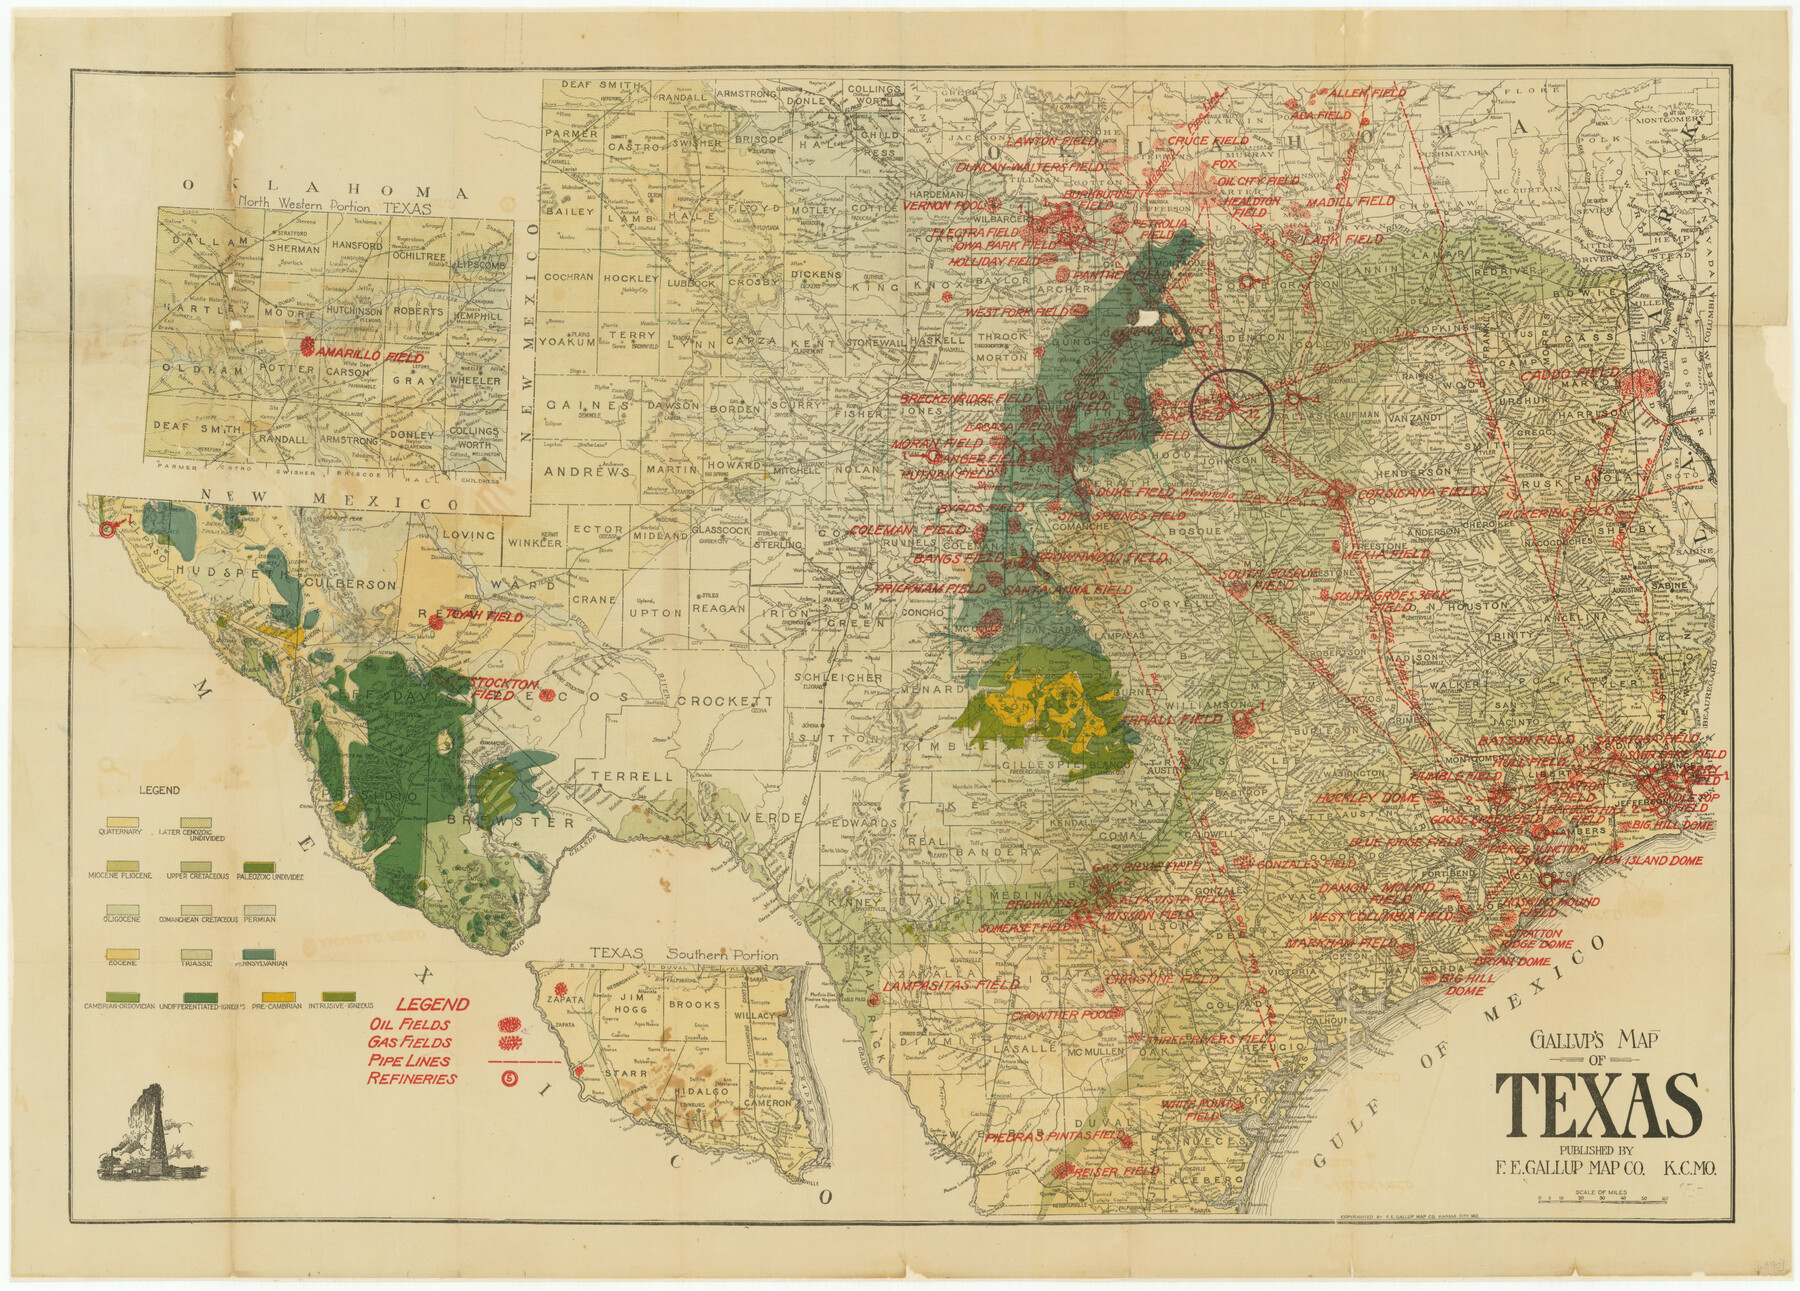 76300, Gallup's Map of Texas, Texas State Library and Archives